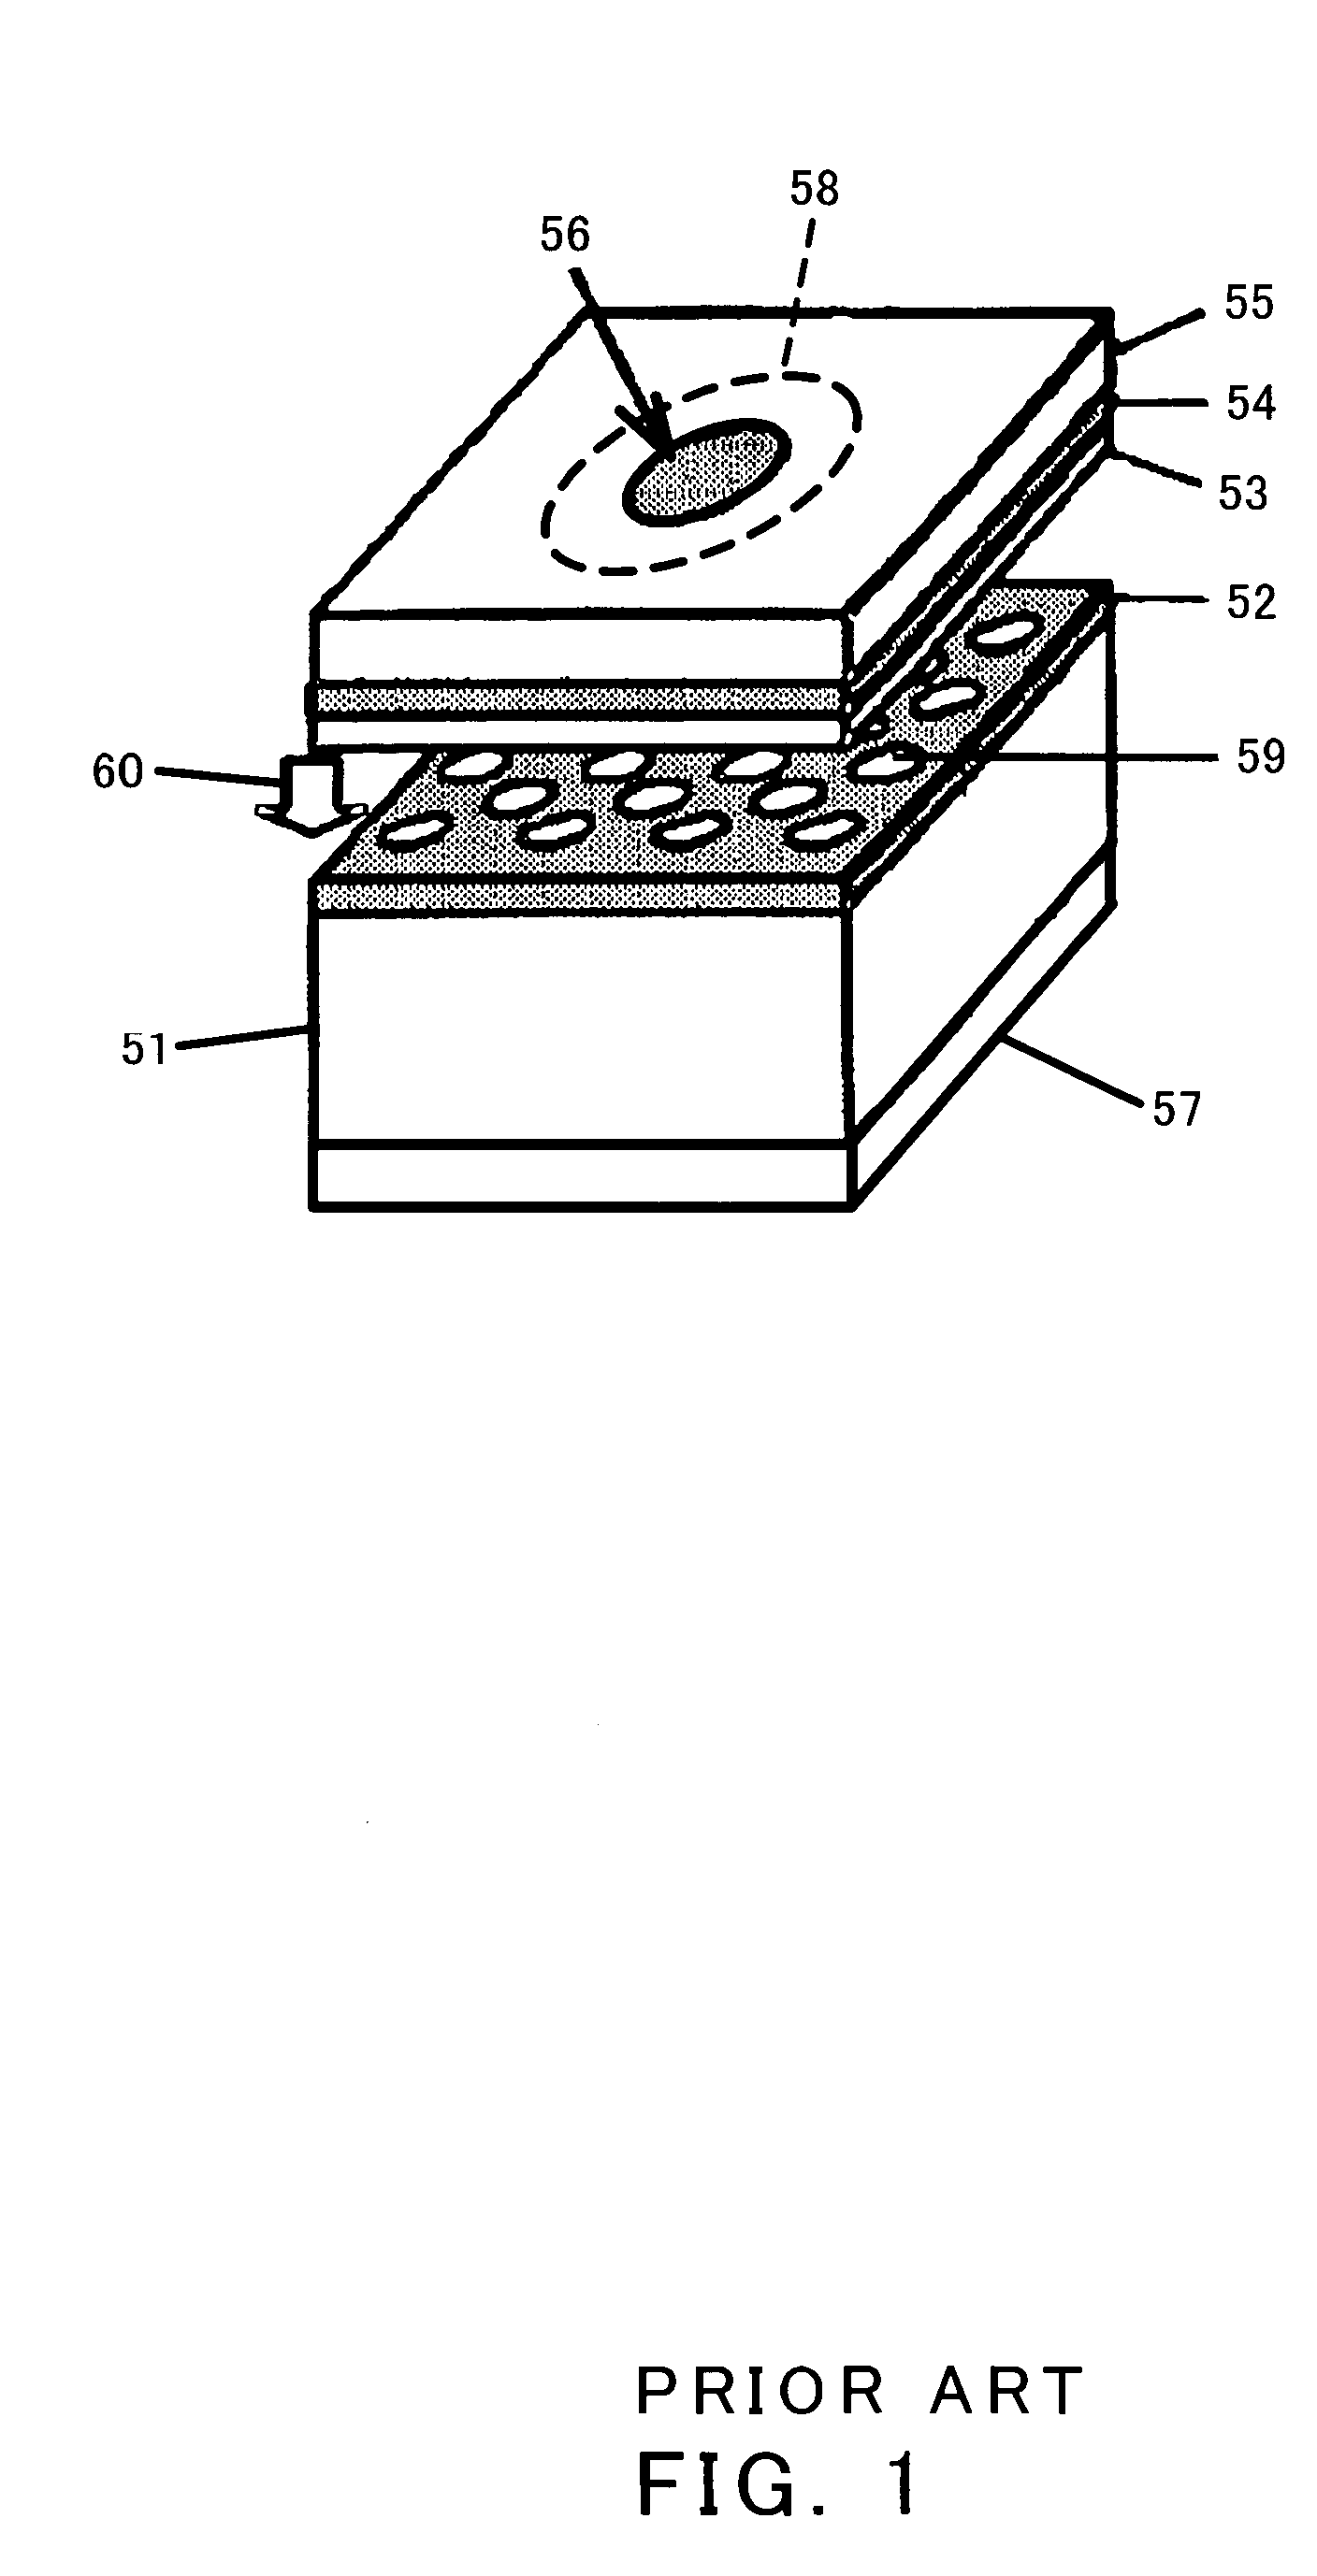 Semiconductor light emitting device and method of fabricating the same